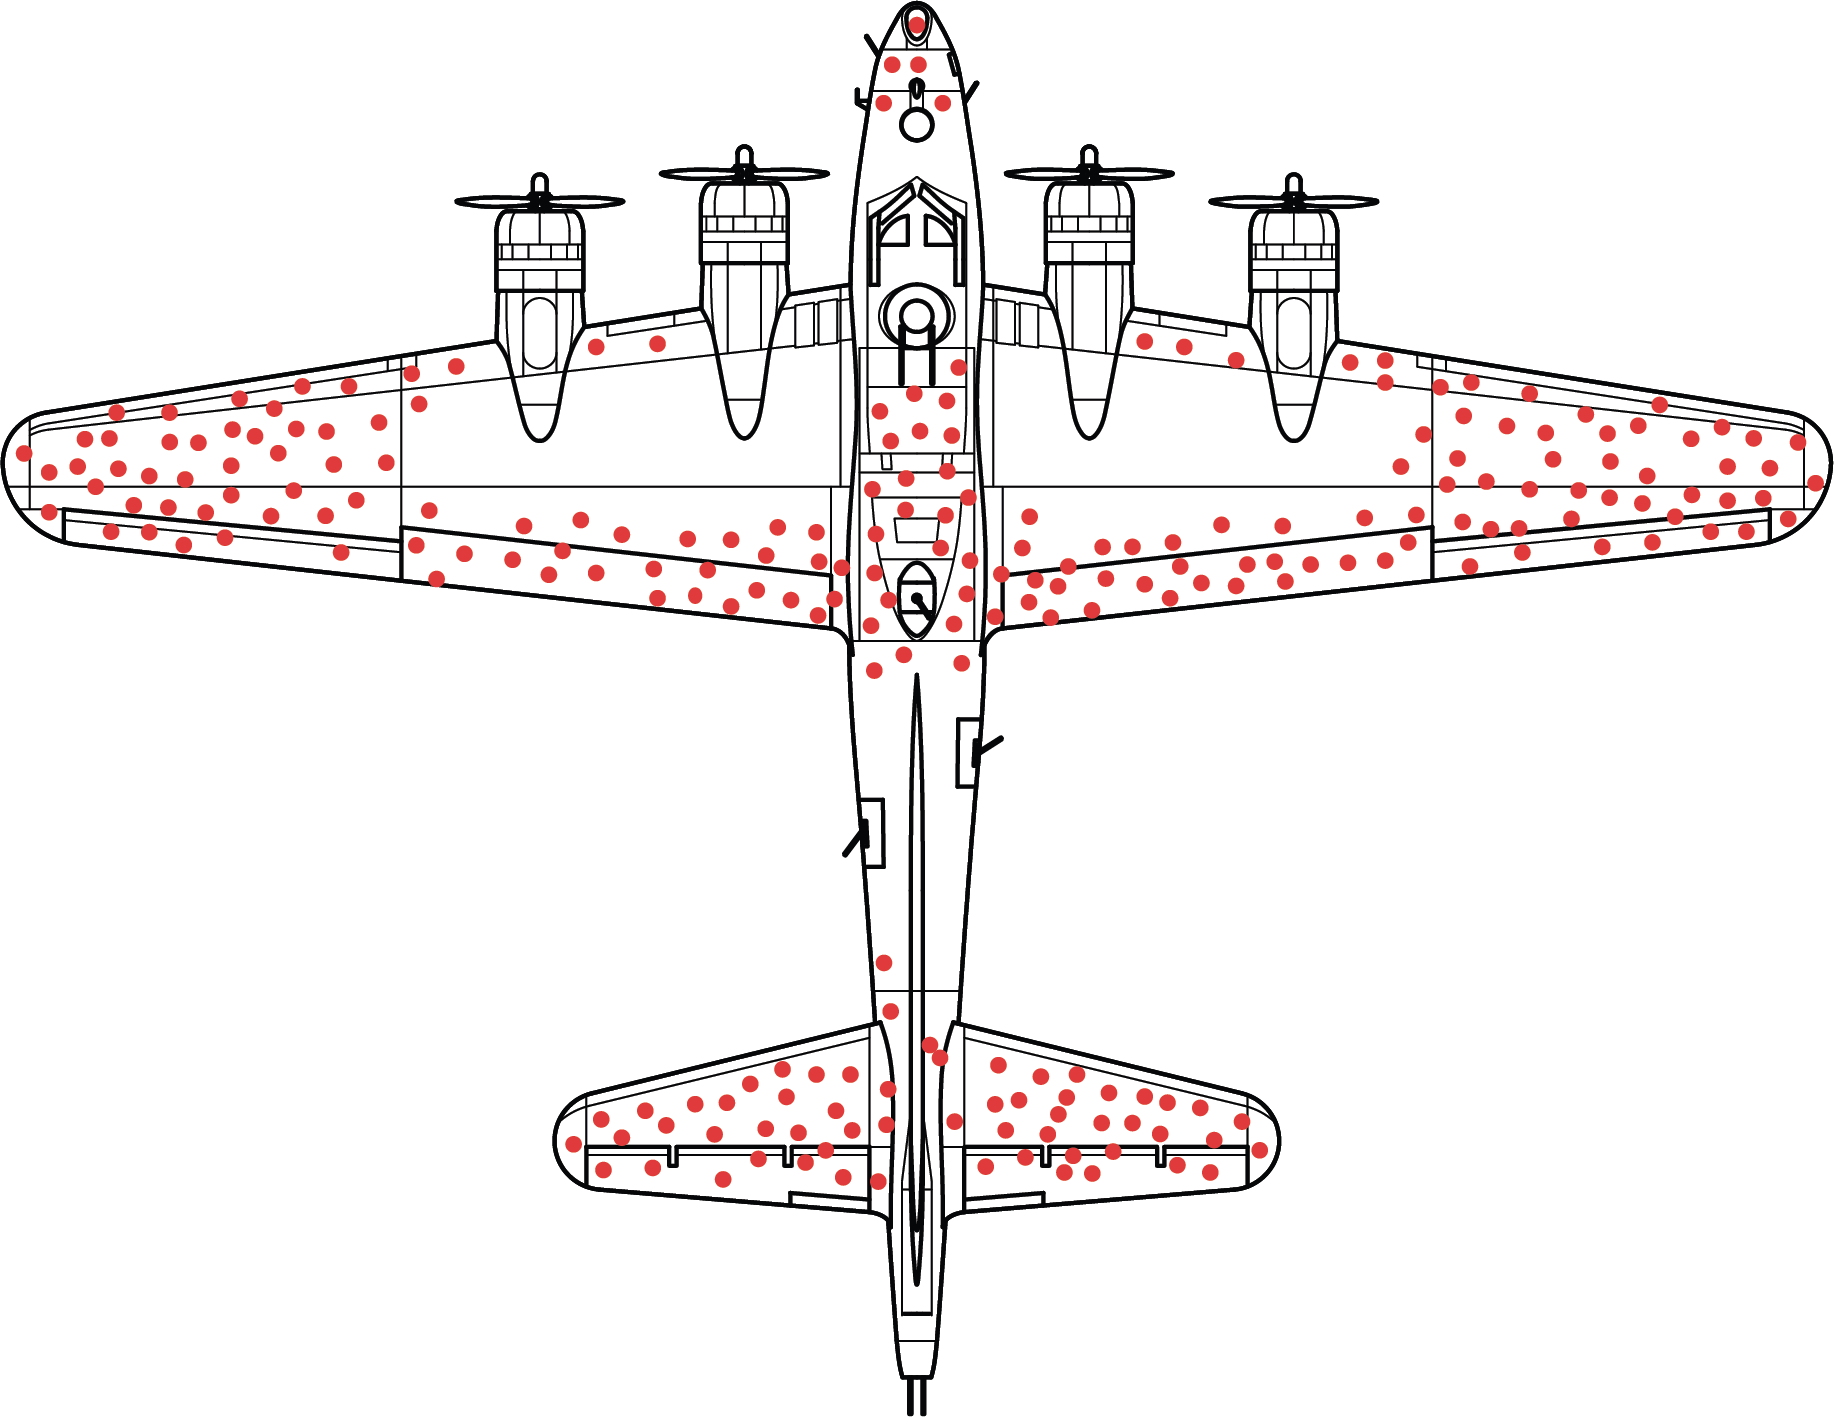 aviation - Does the survivorship bias airplane diagram come from